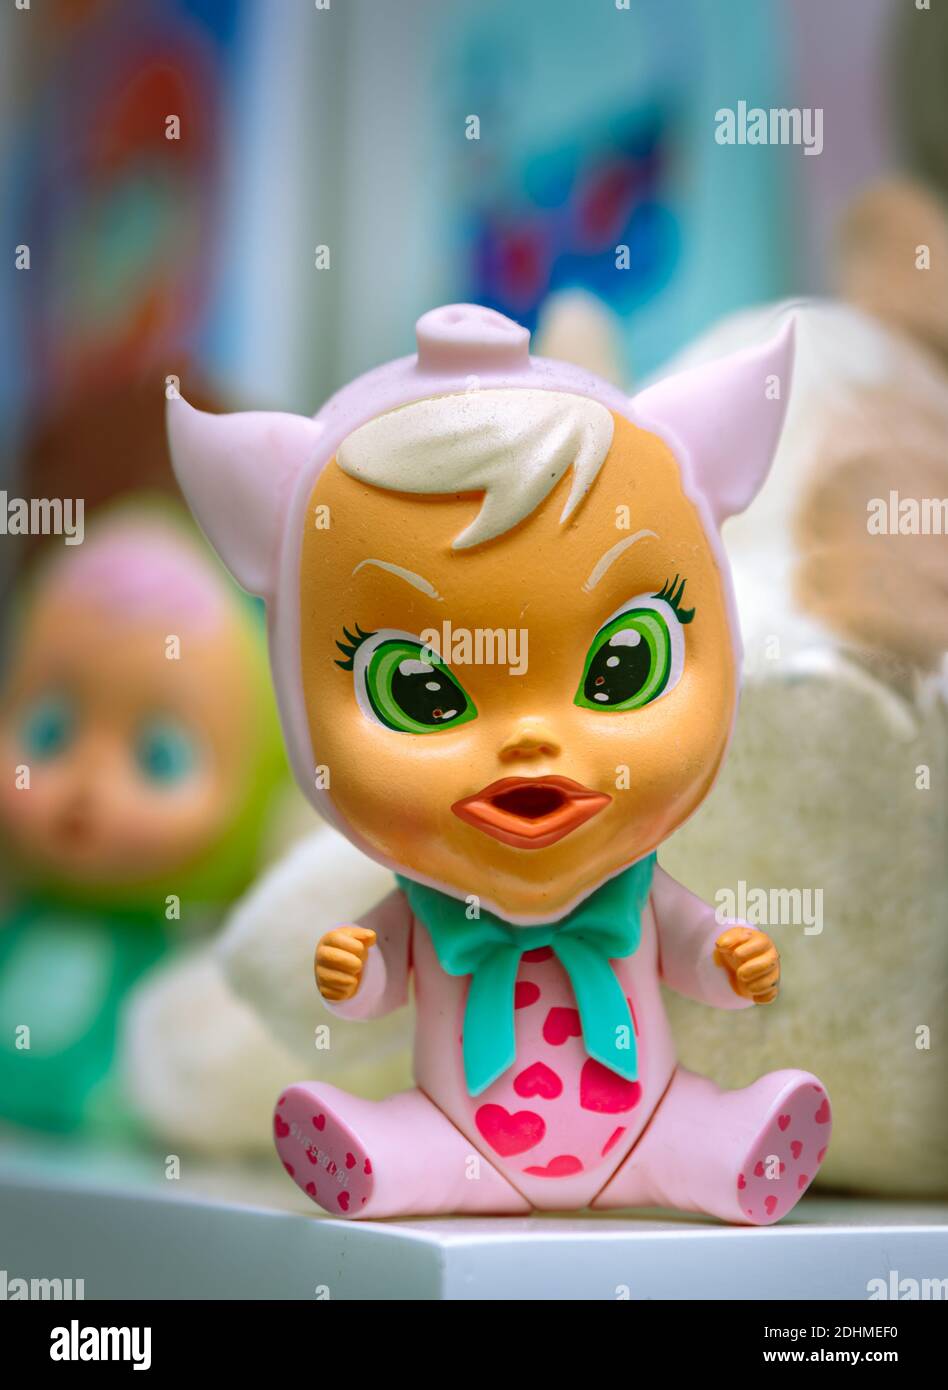 Little toy - puppet with angry face, close-up Stock Photo